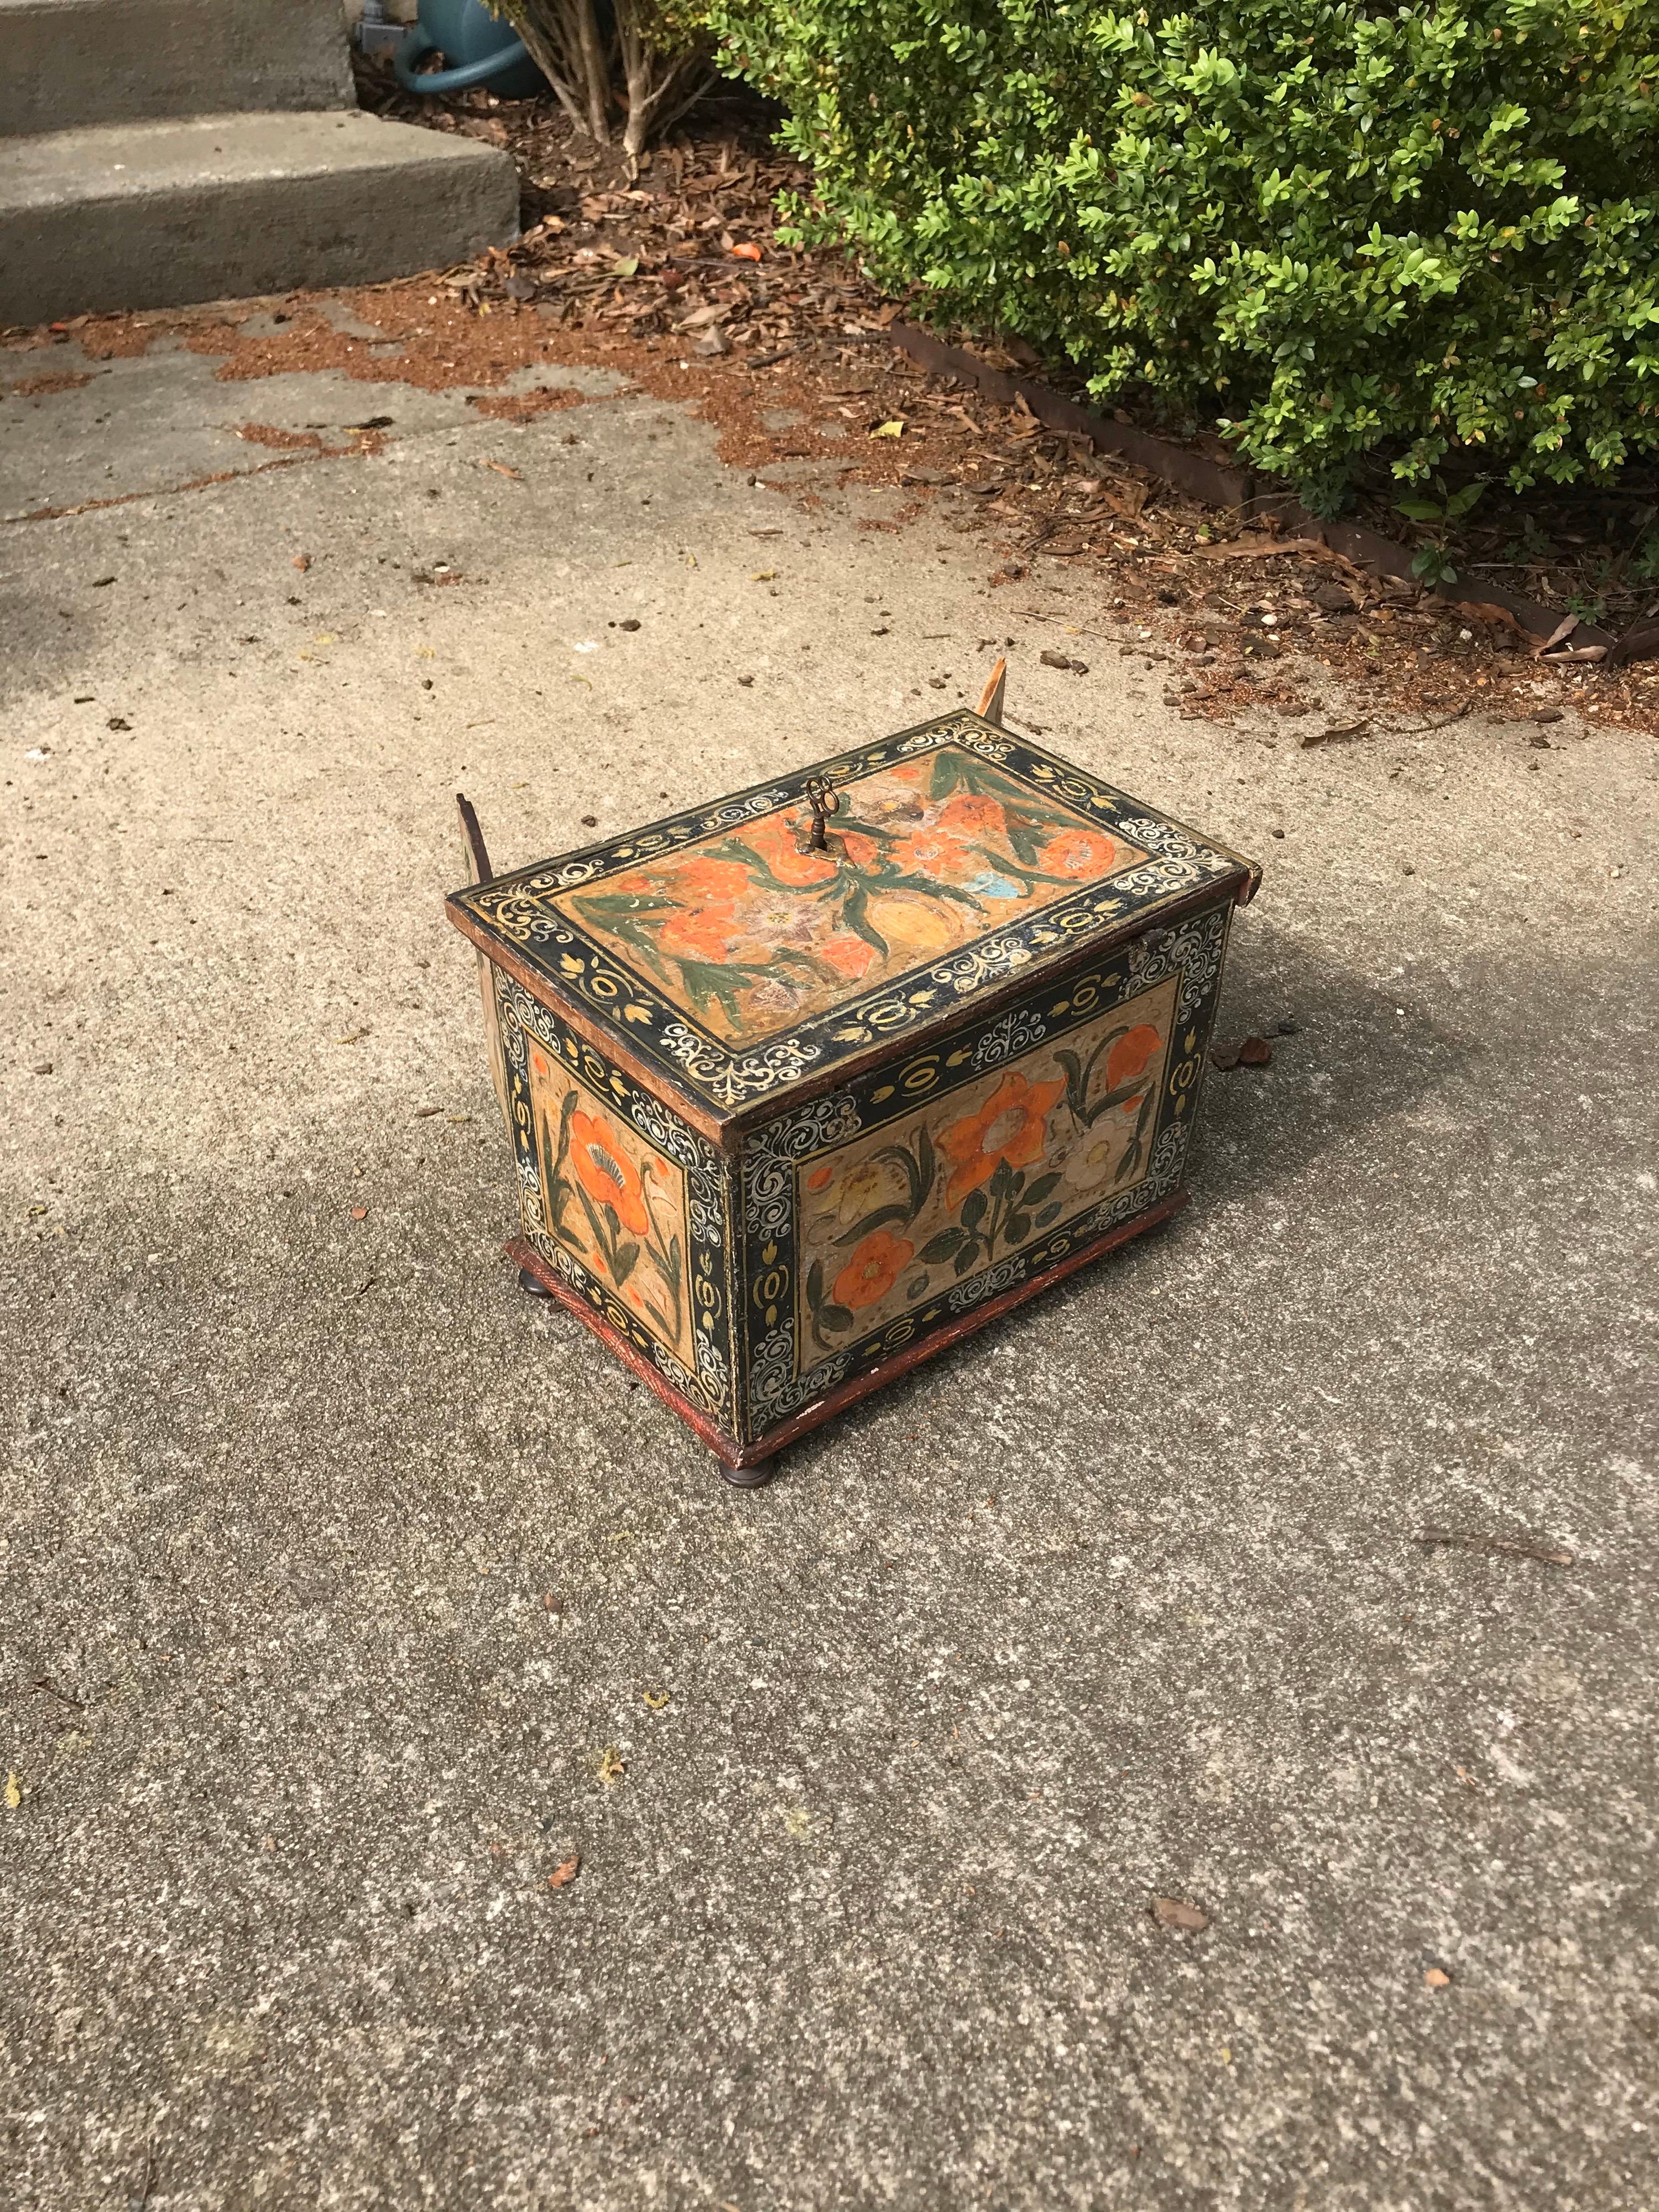 18th-19th century paint decorated continental fitted box. Floral design painted on top and sides with an estate scene painted on both sides of the doors. Doors open to reveal 6 smaller drawers over one large drawer at the bottom. Top opens with